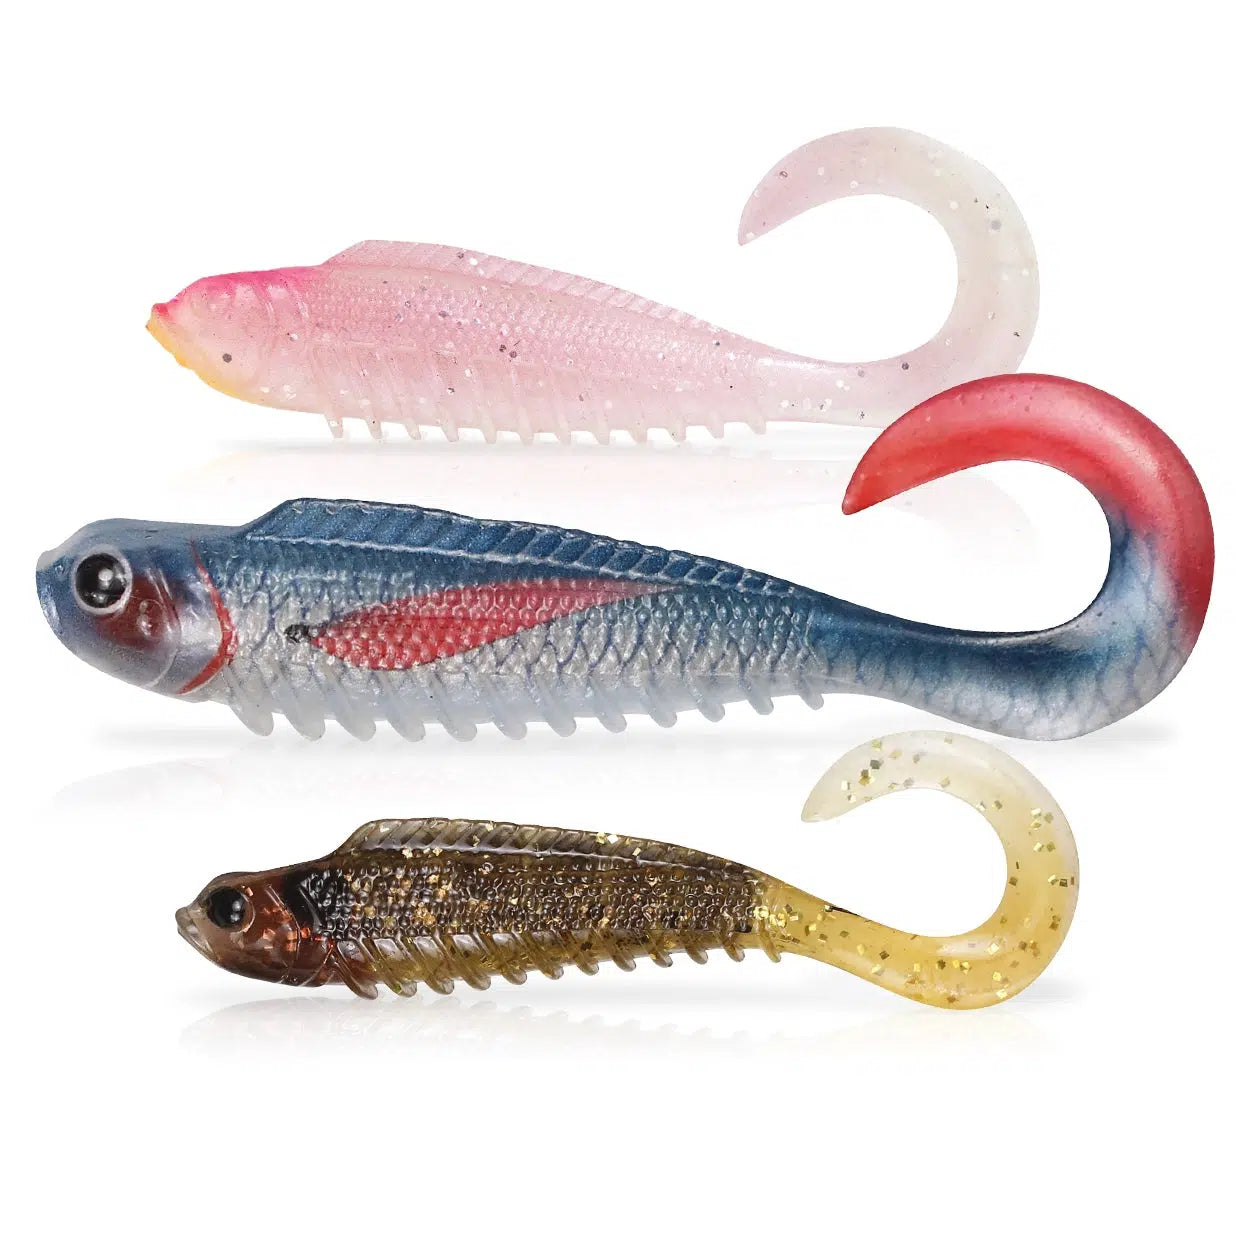 fishing lure packaging bag,soft plastic worm lures bag,spinner